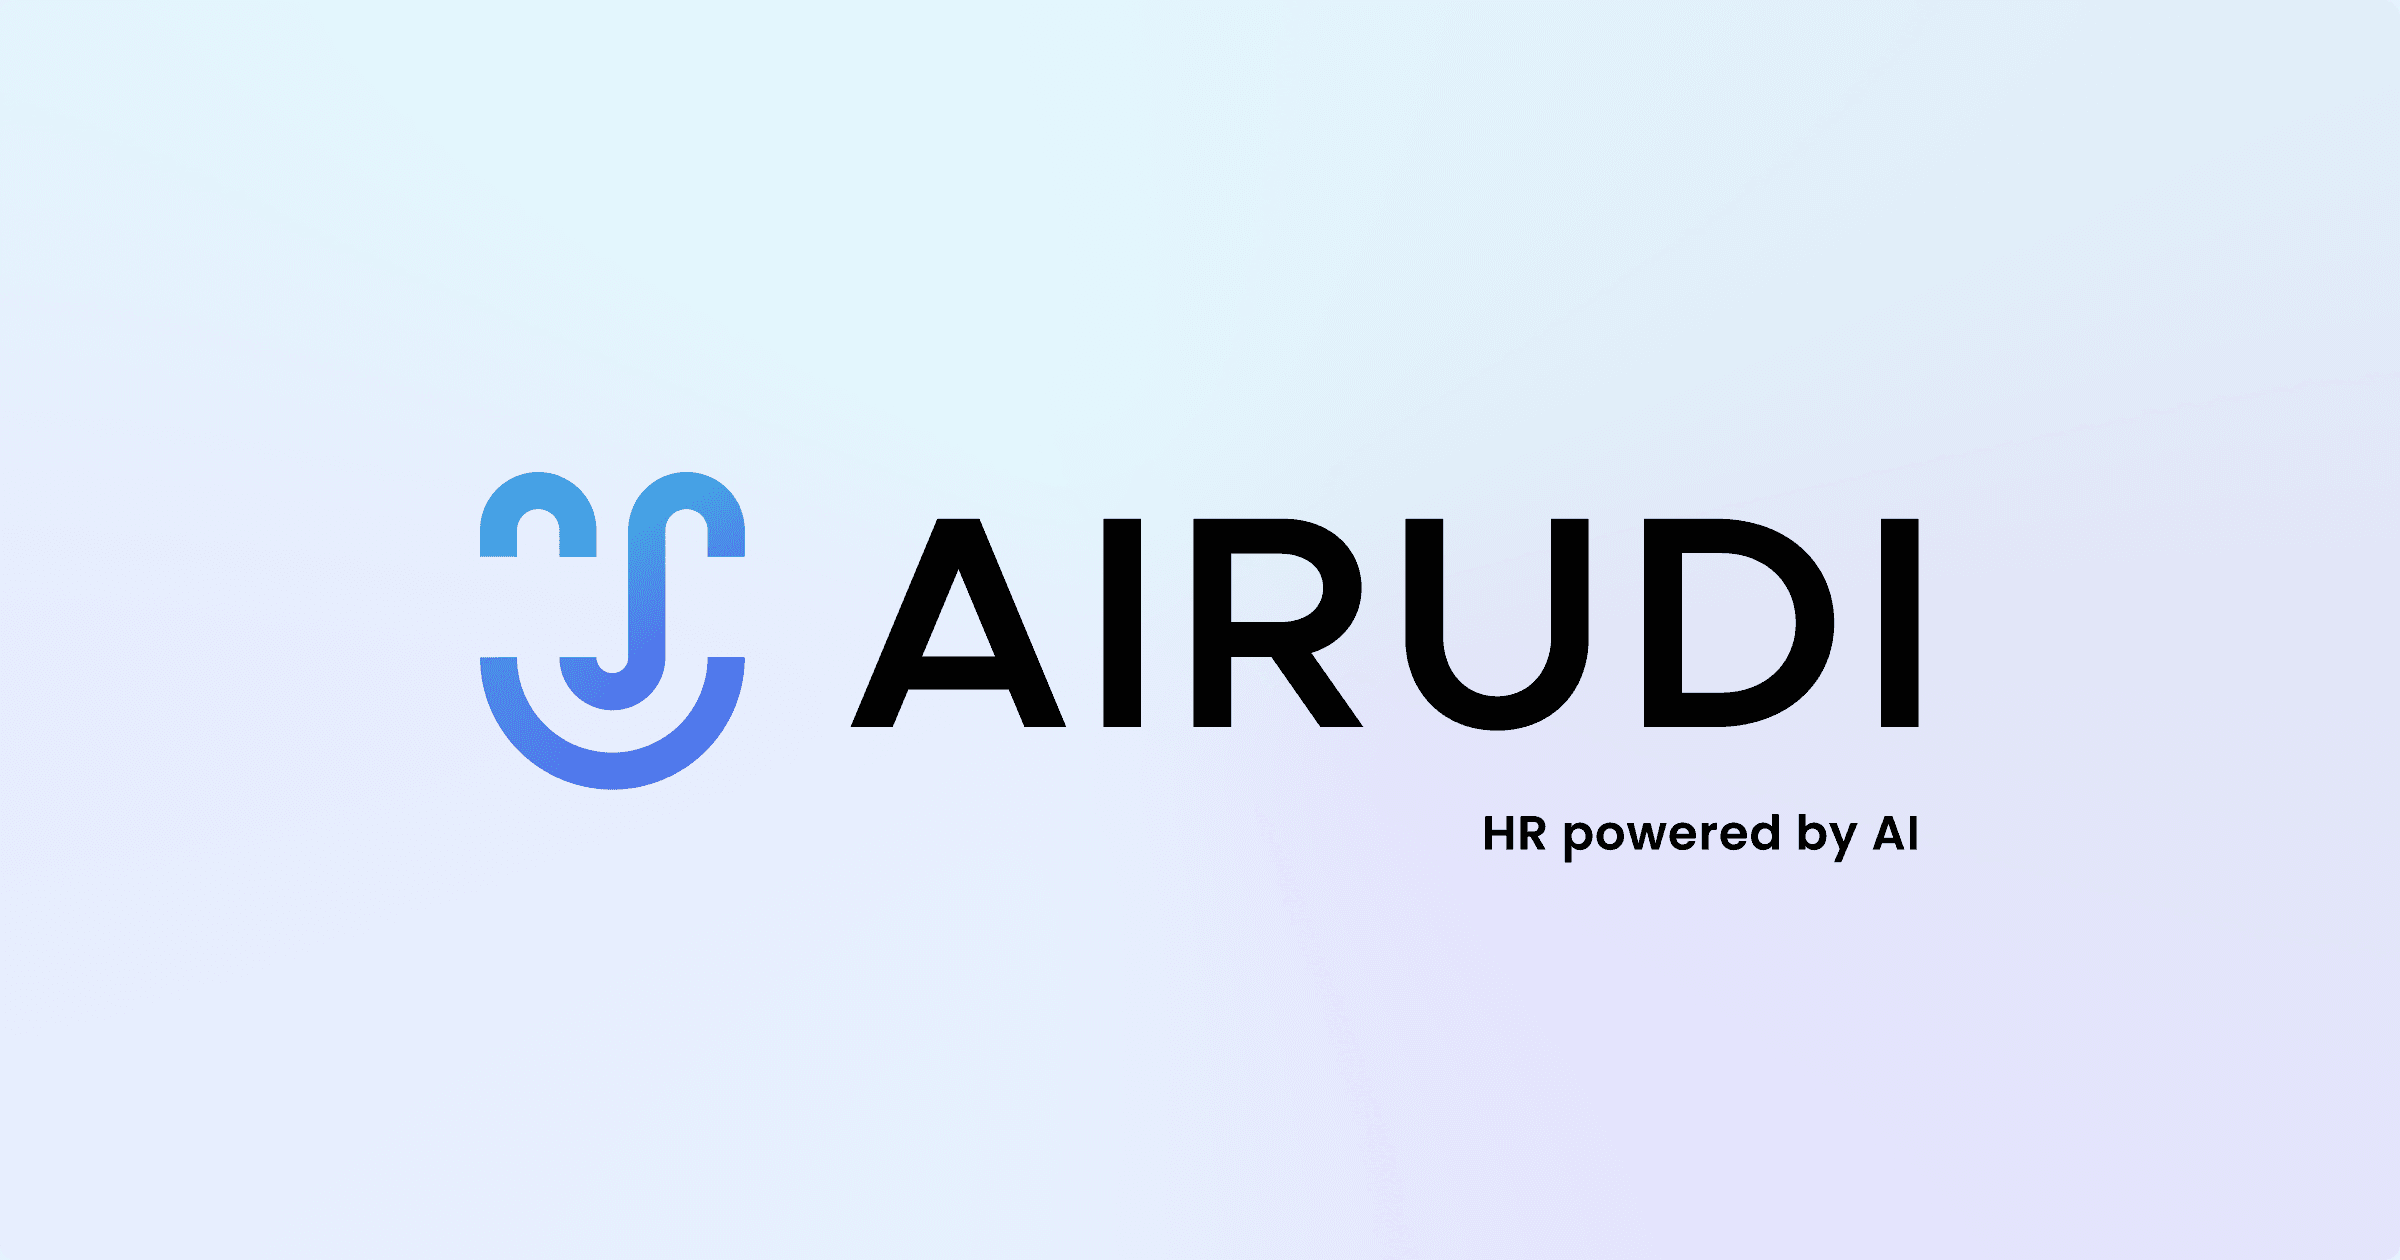 Image for Performance evaluation | Airudi